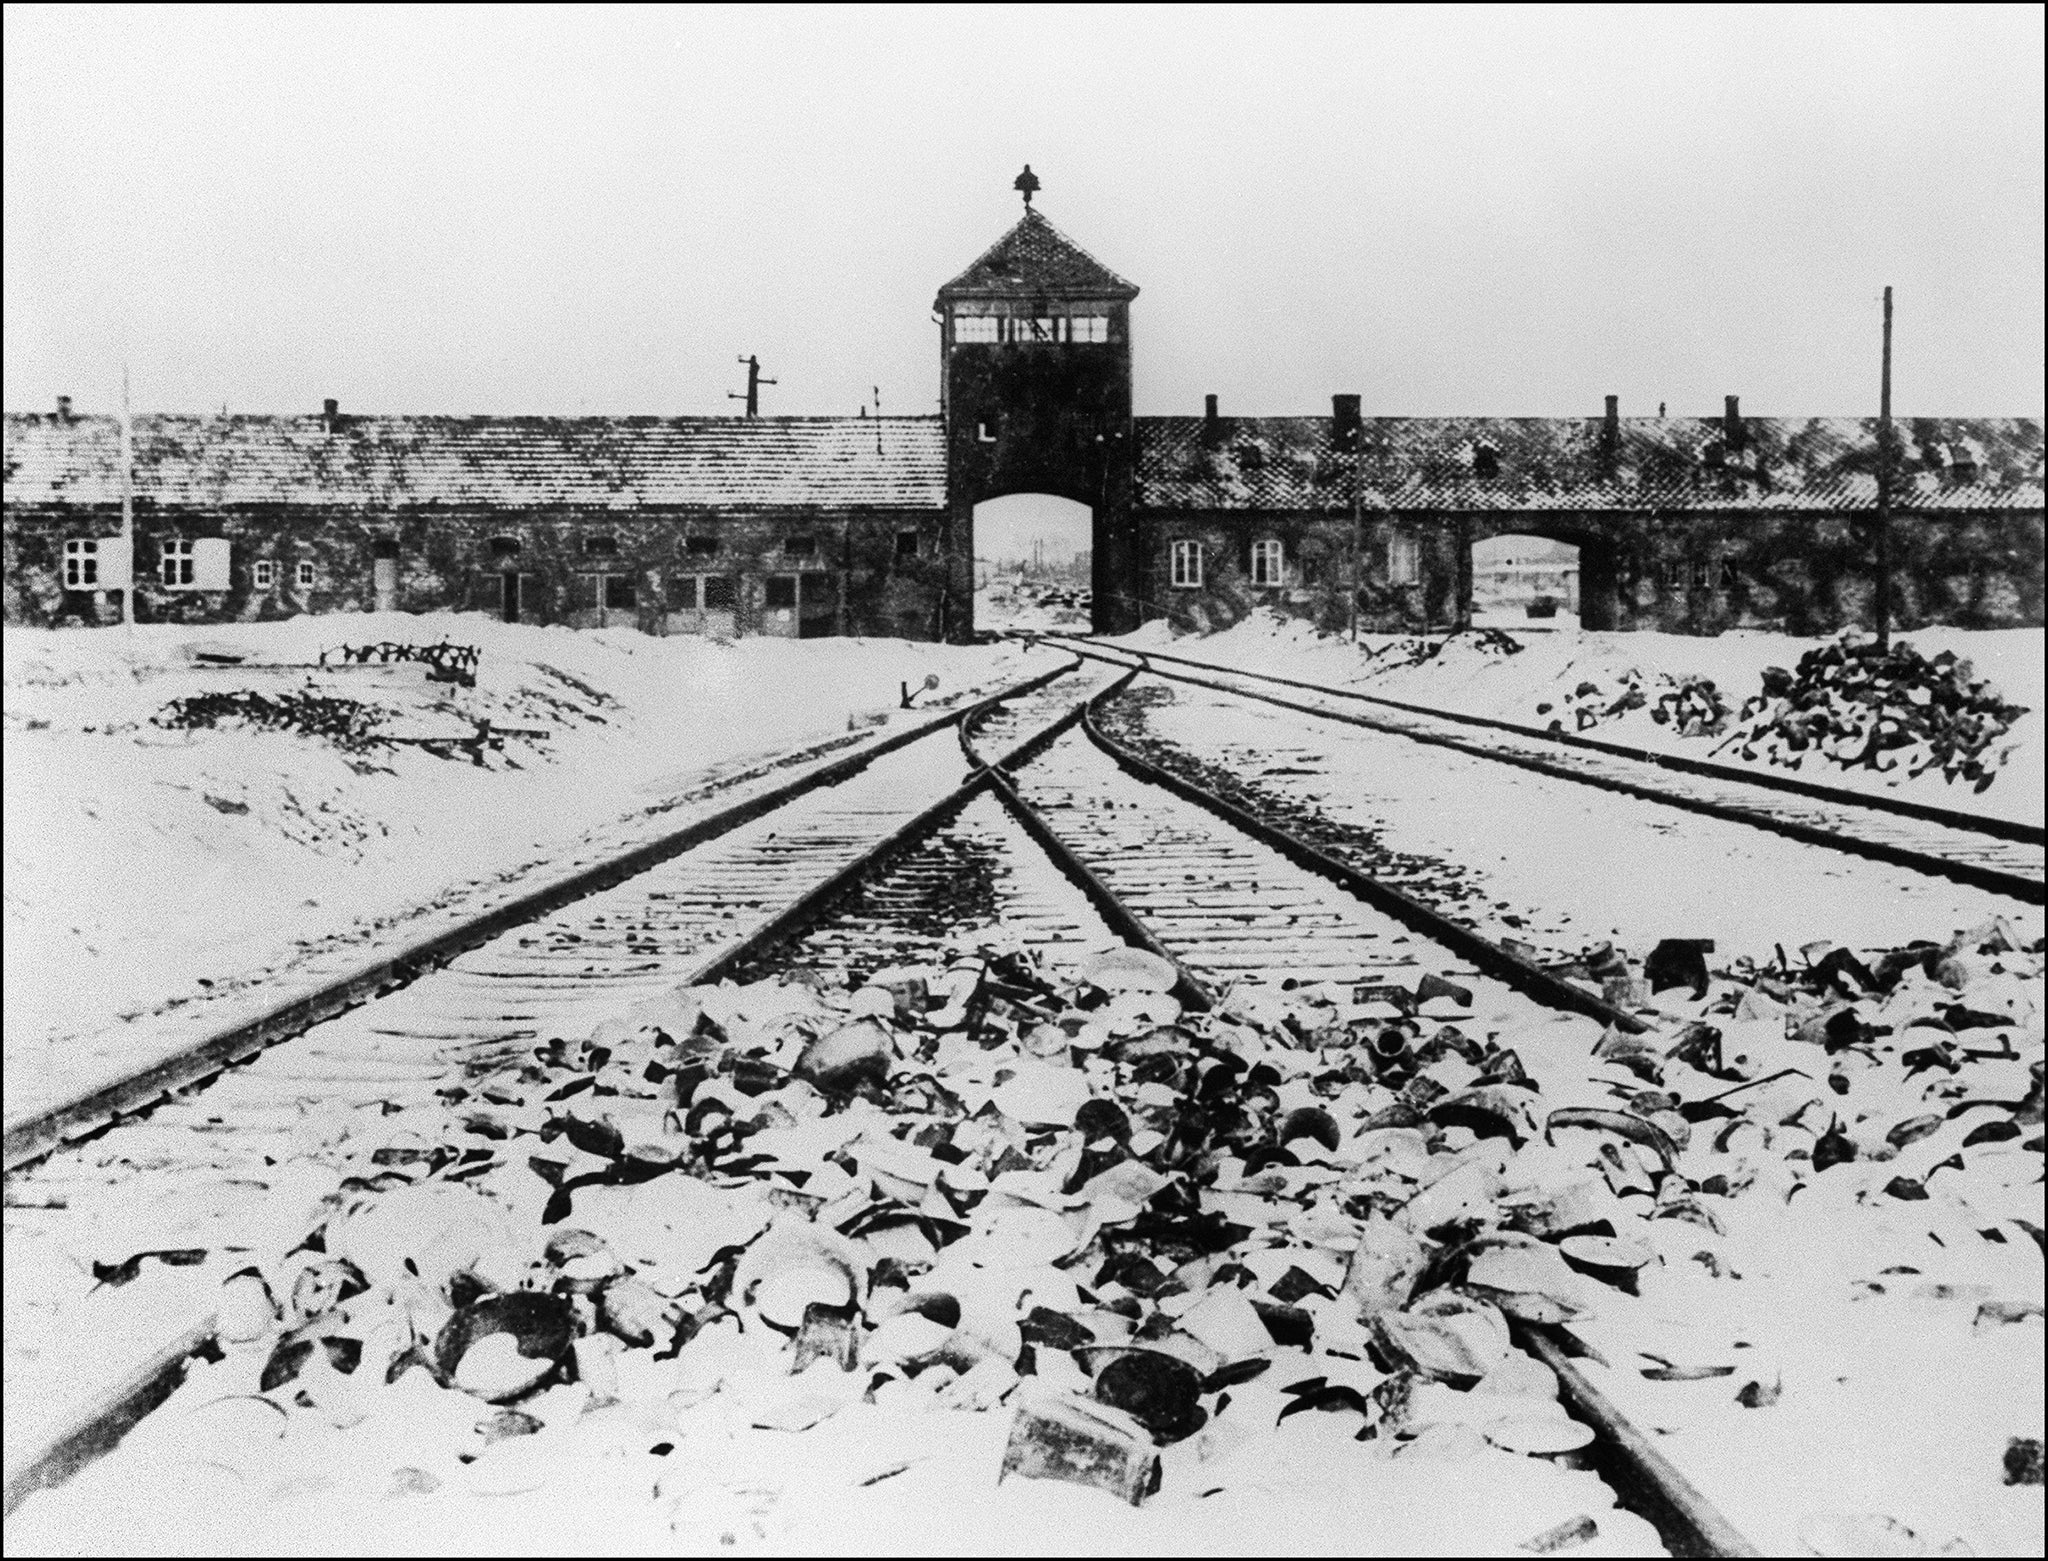 The train tracks leading into the most notorious of the Nazi concentration camps